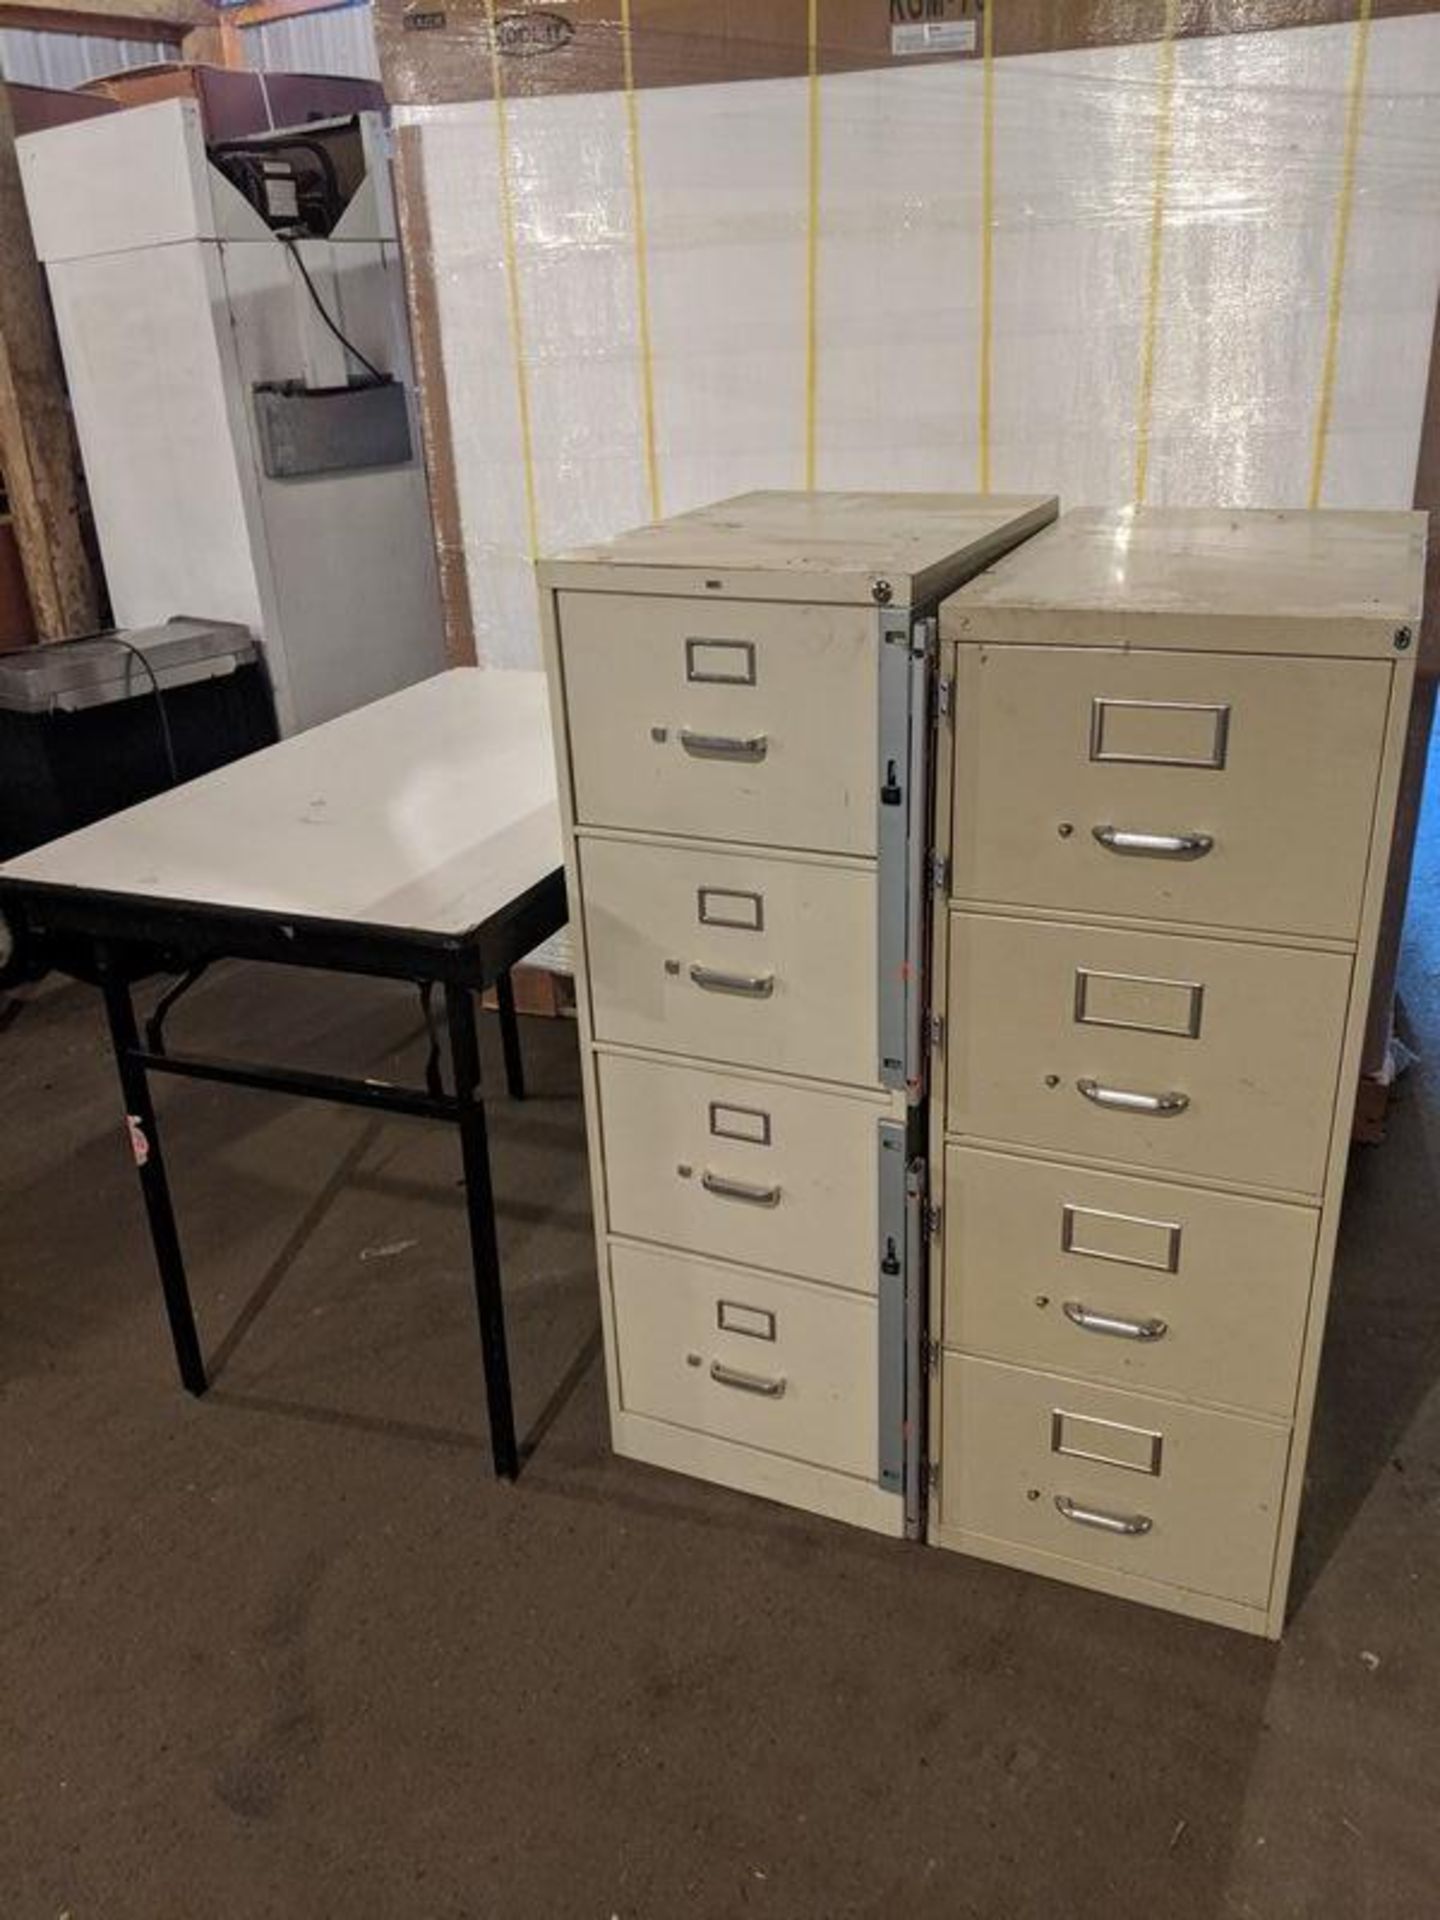 2 Filing Cabinets and a Folding Table with Electrical Outlet